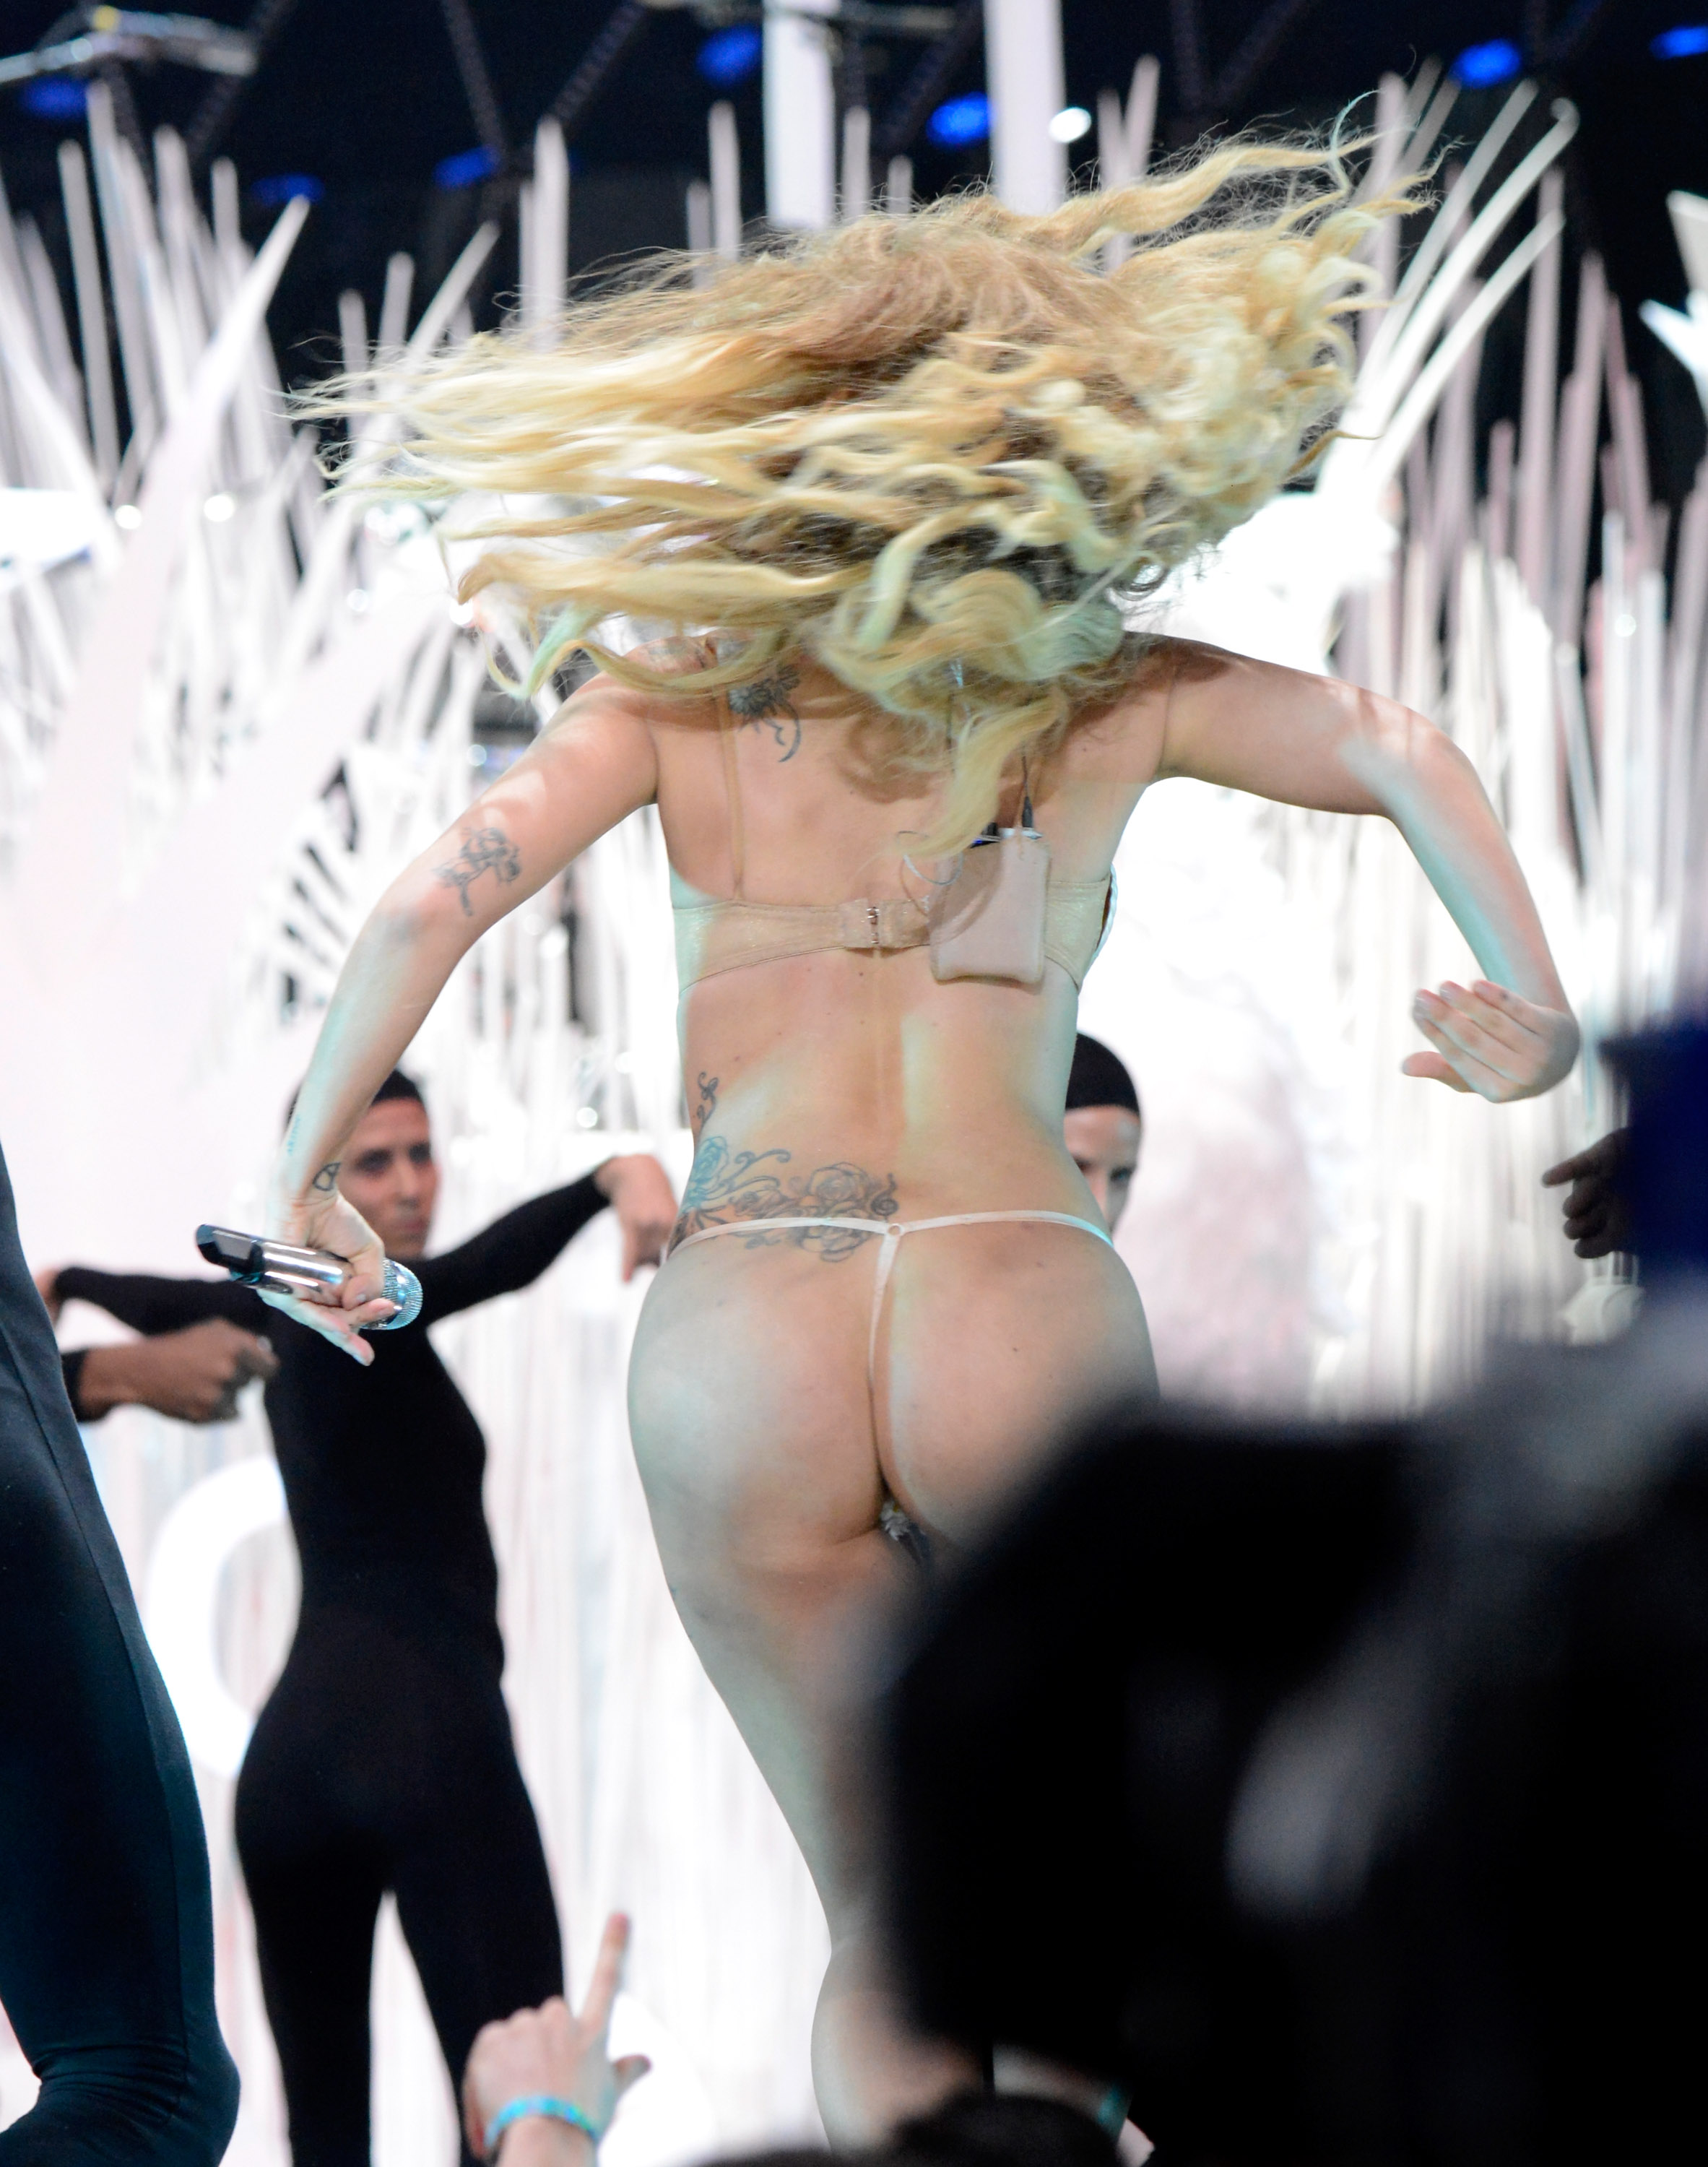 Lady Gaga Sideboob Continues Her Body Part Flashing South American Tour